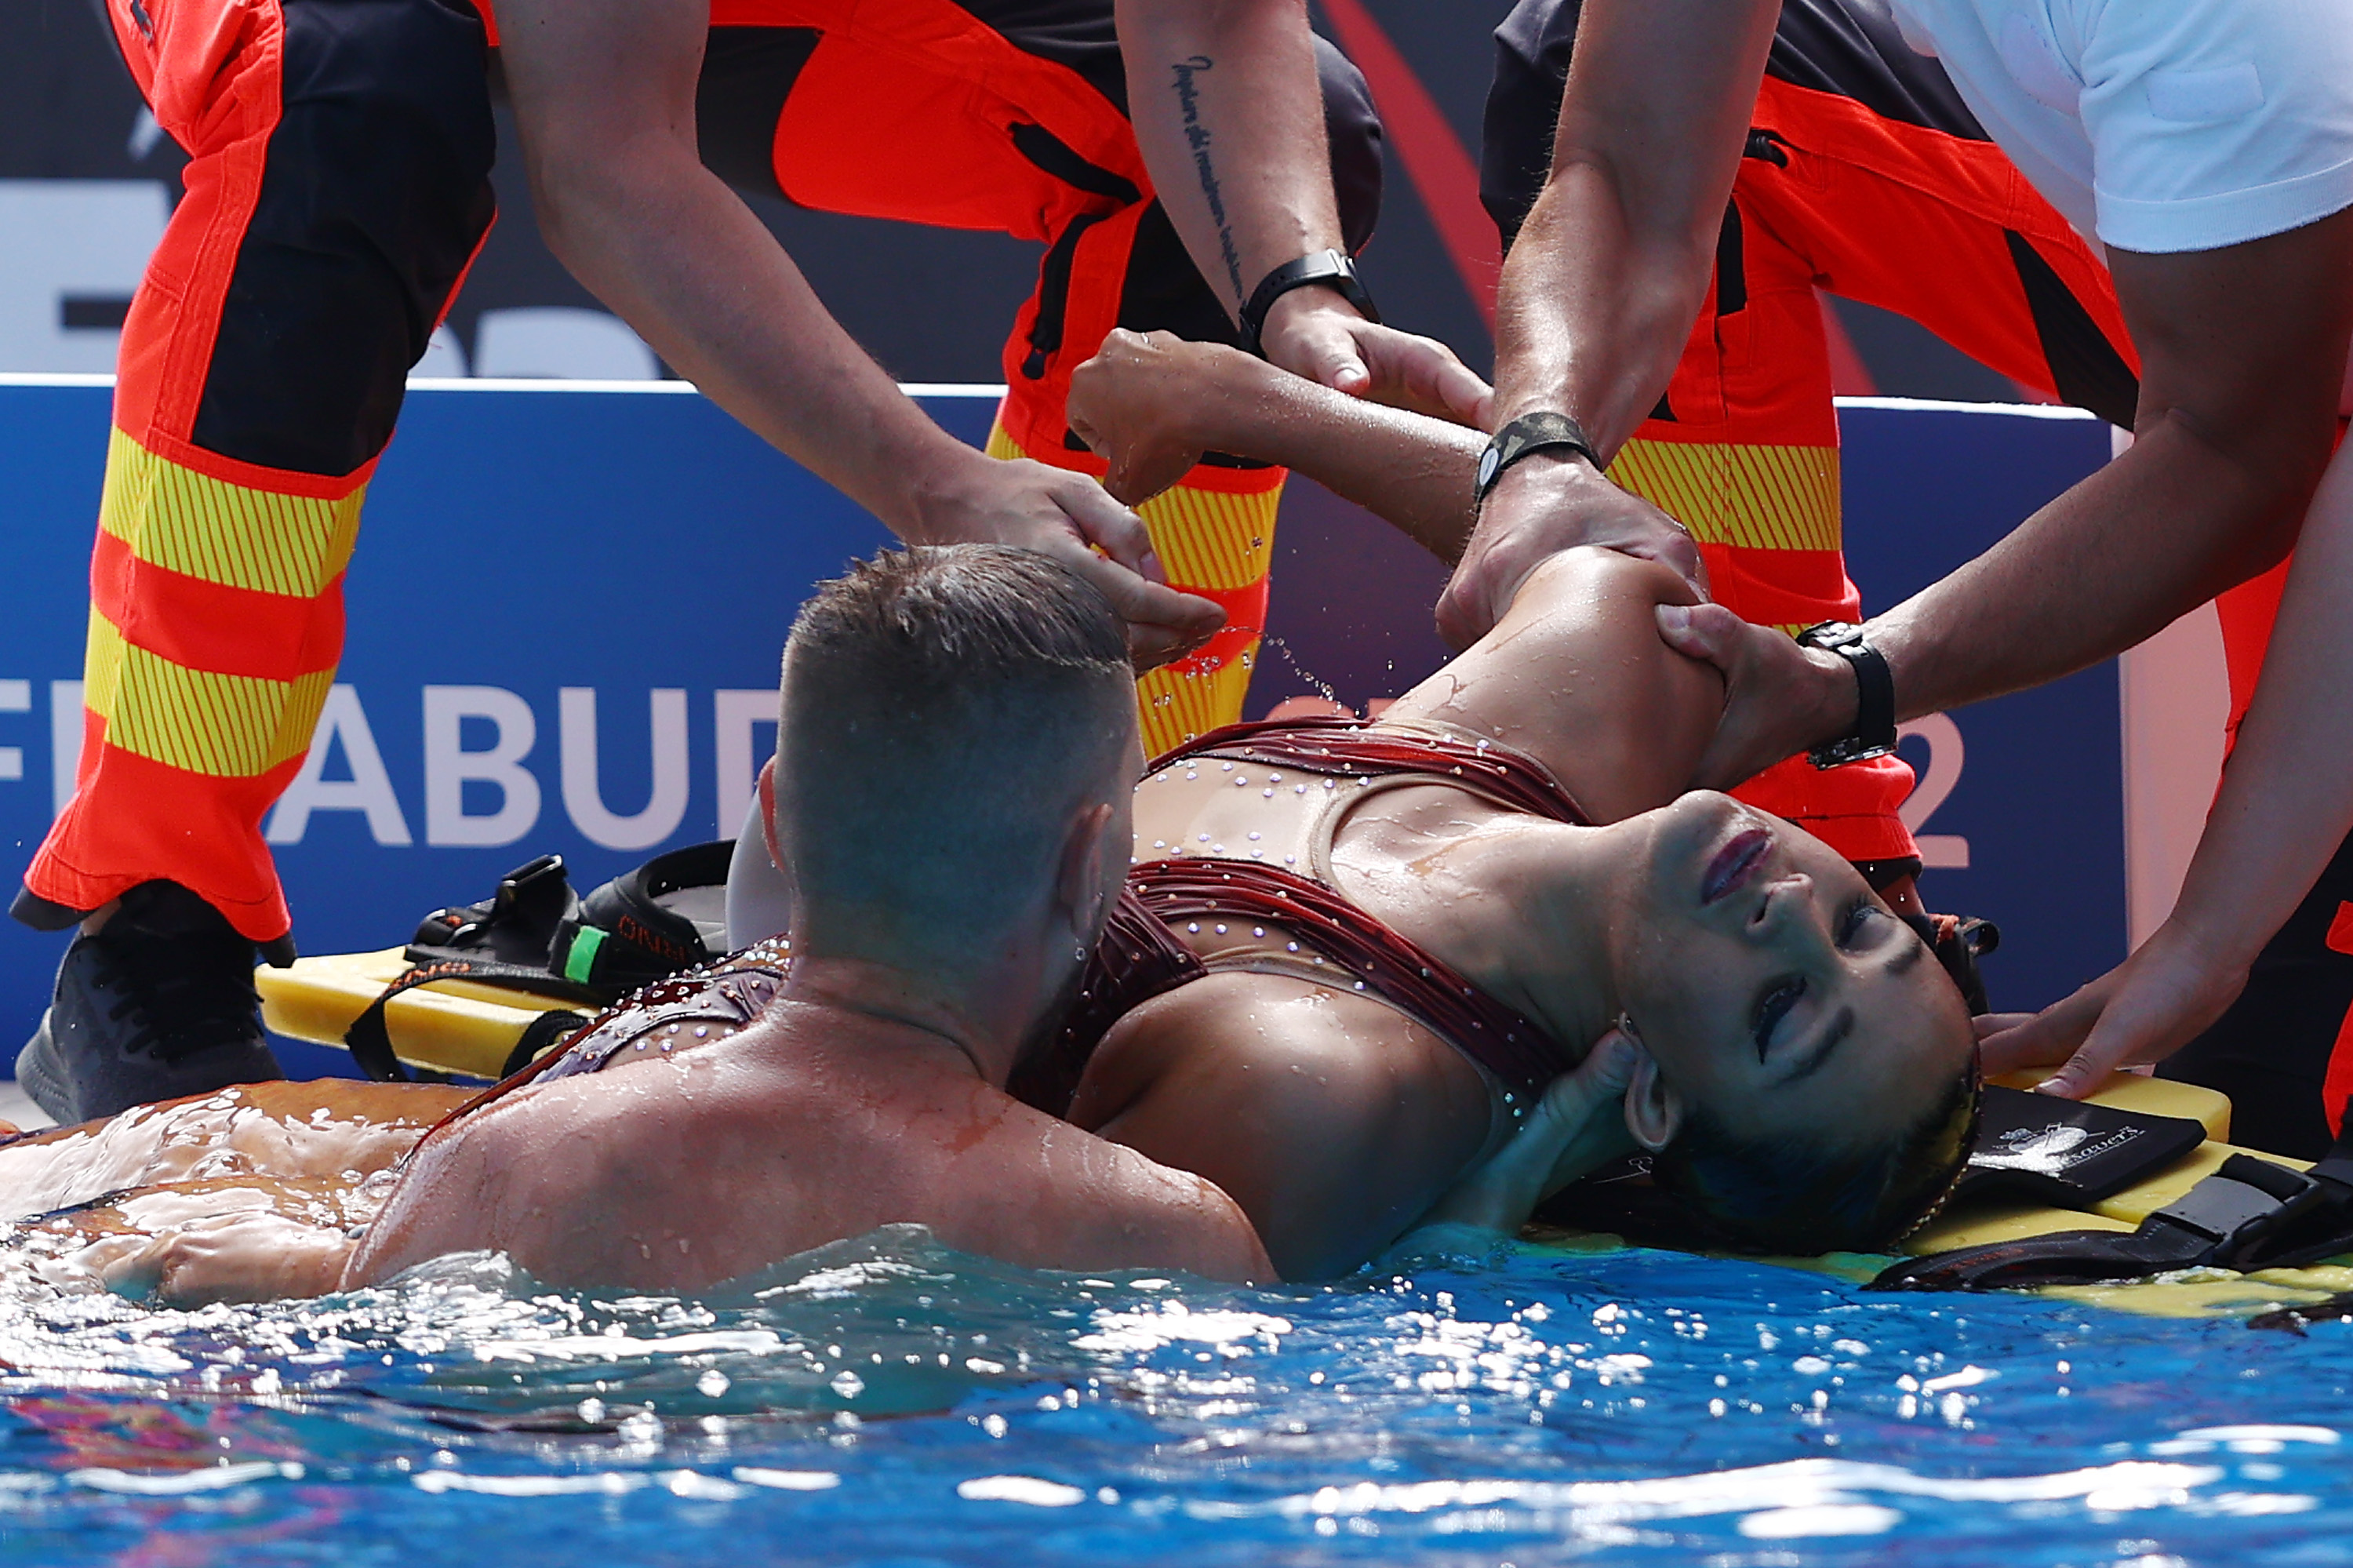 Anita Alvarez of the USA is attended to by medical staff following her Women's Solo Free Final performance on day six of the Budapest 2022 FINA World Championships. Photo: Dean Mouhtaropoulos